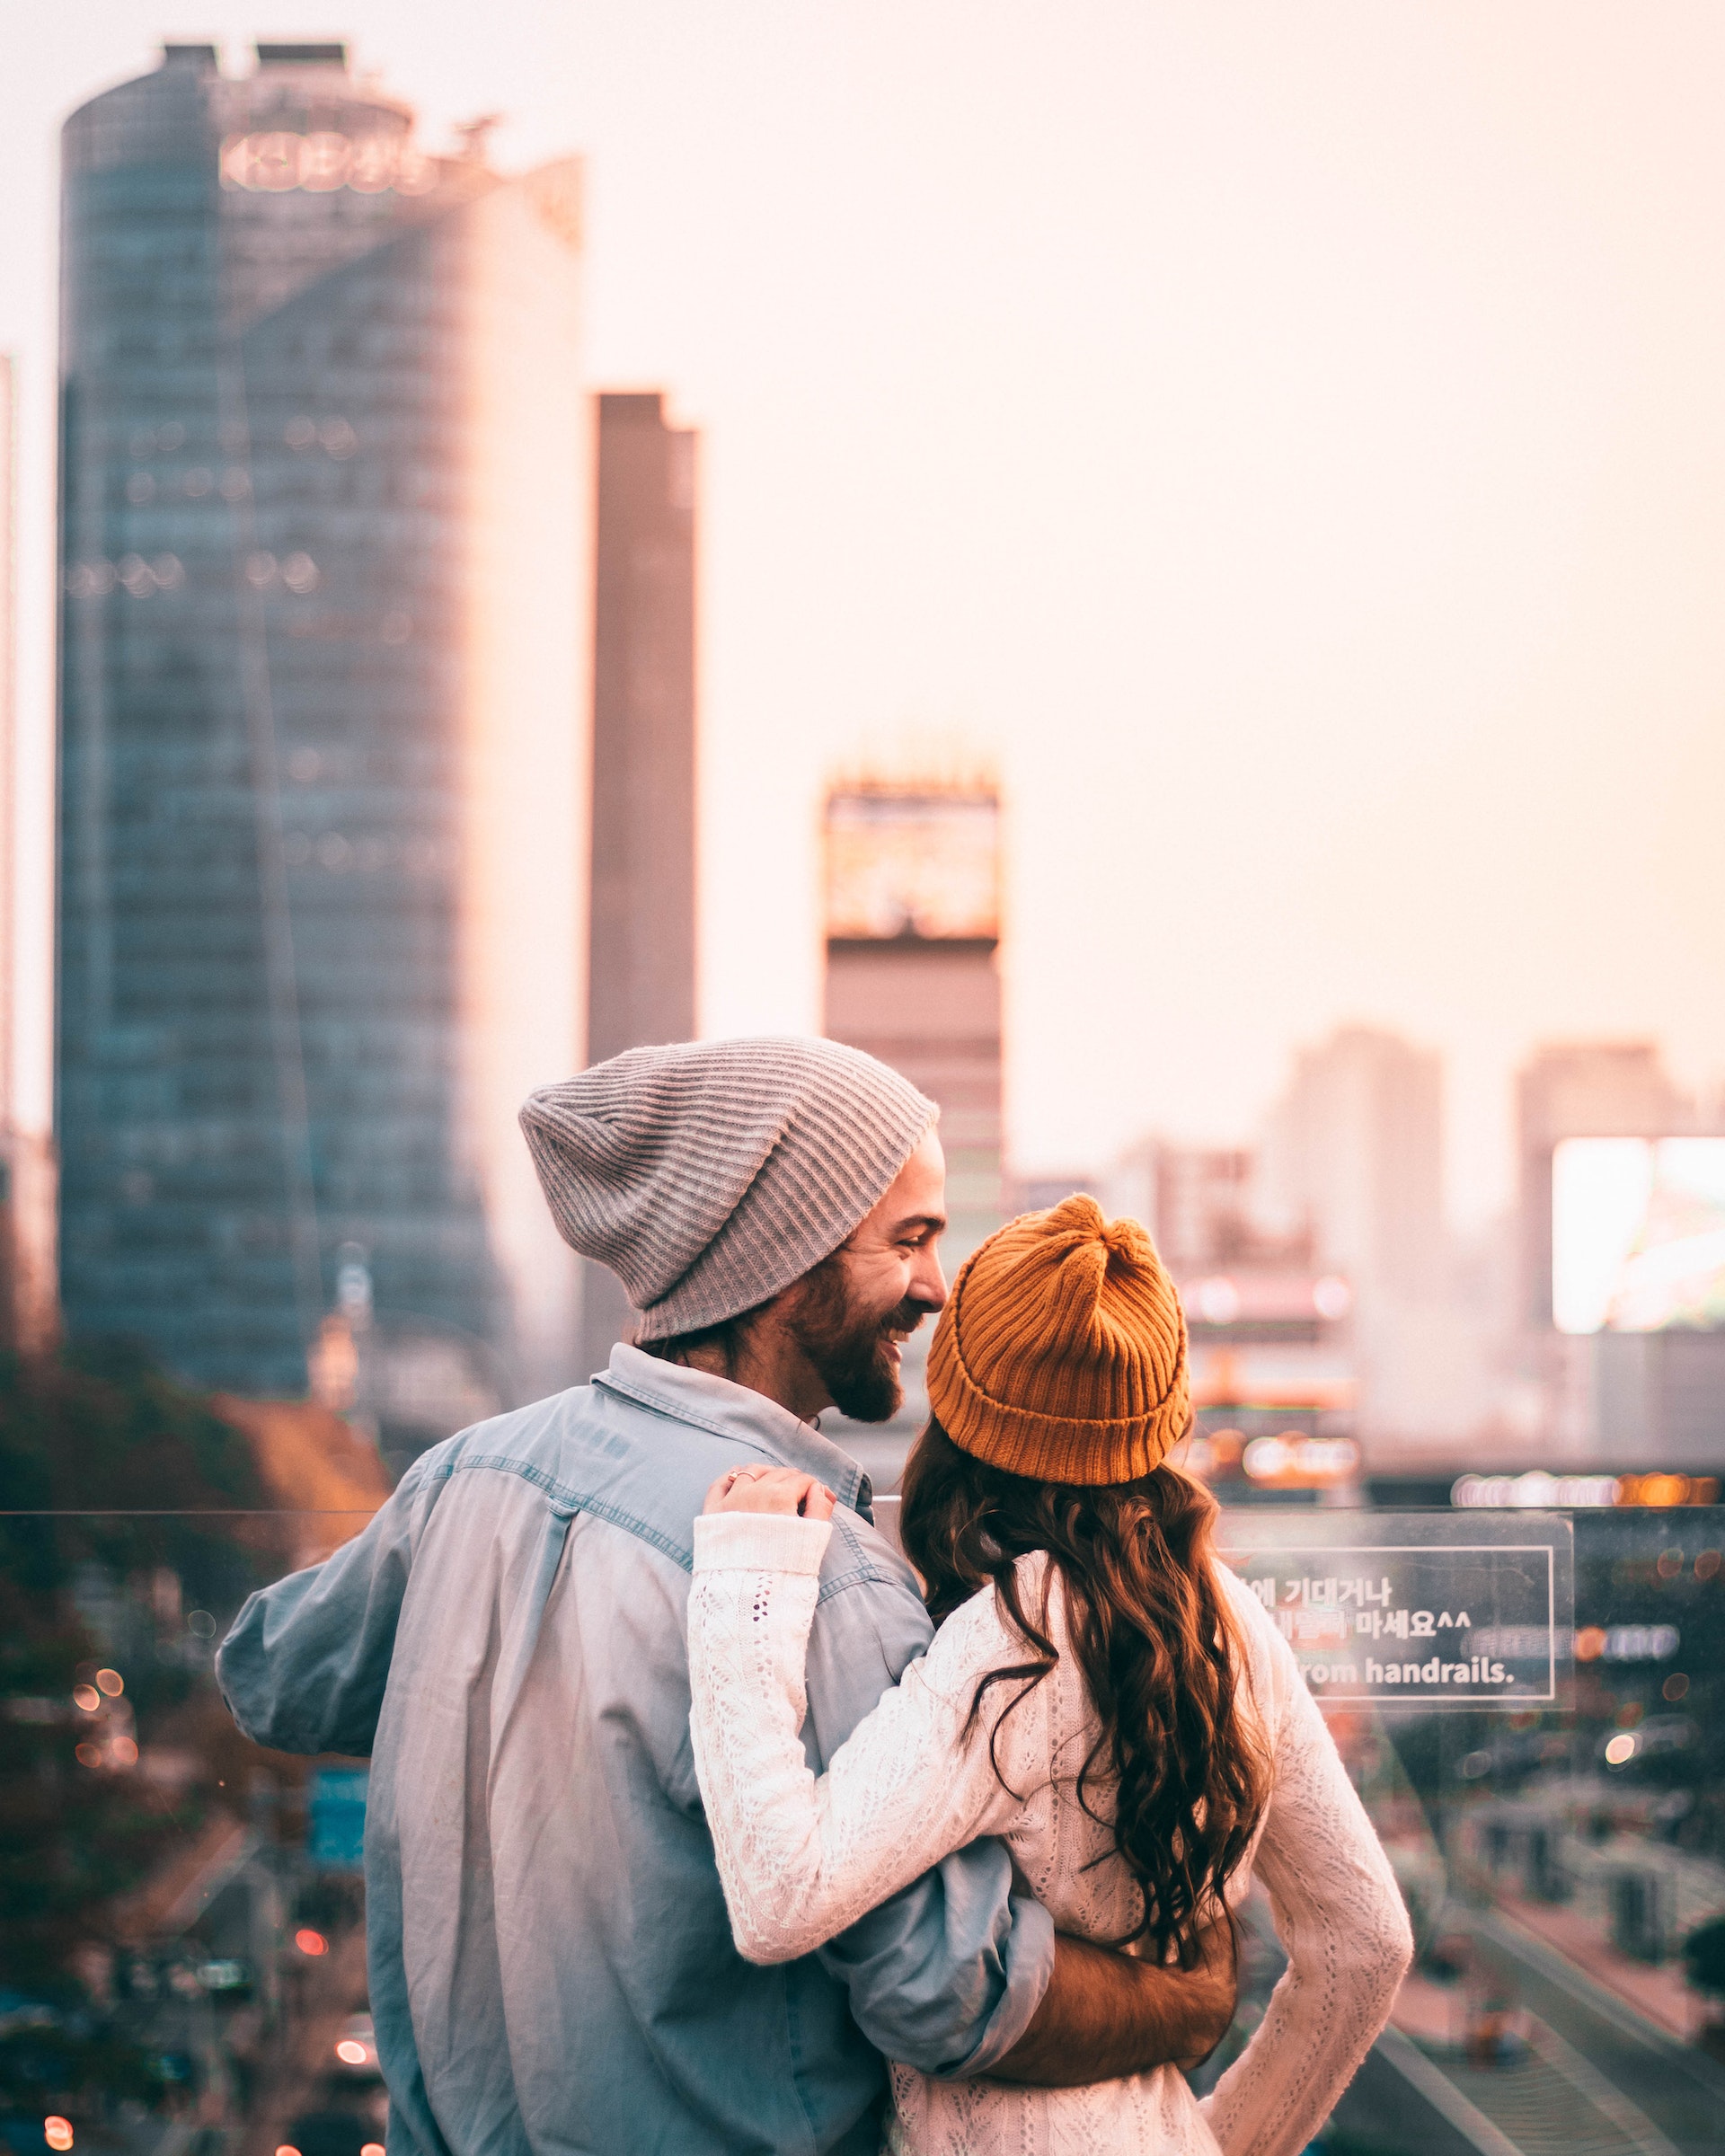 A couple standing together | Source: Pexels